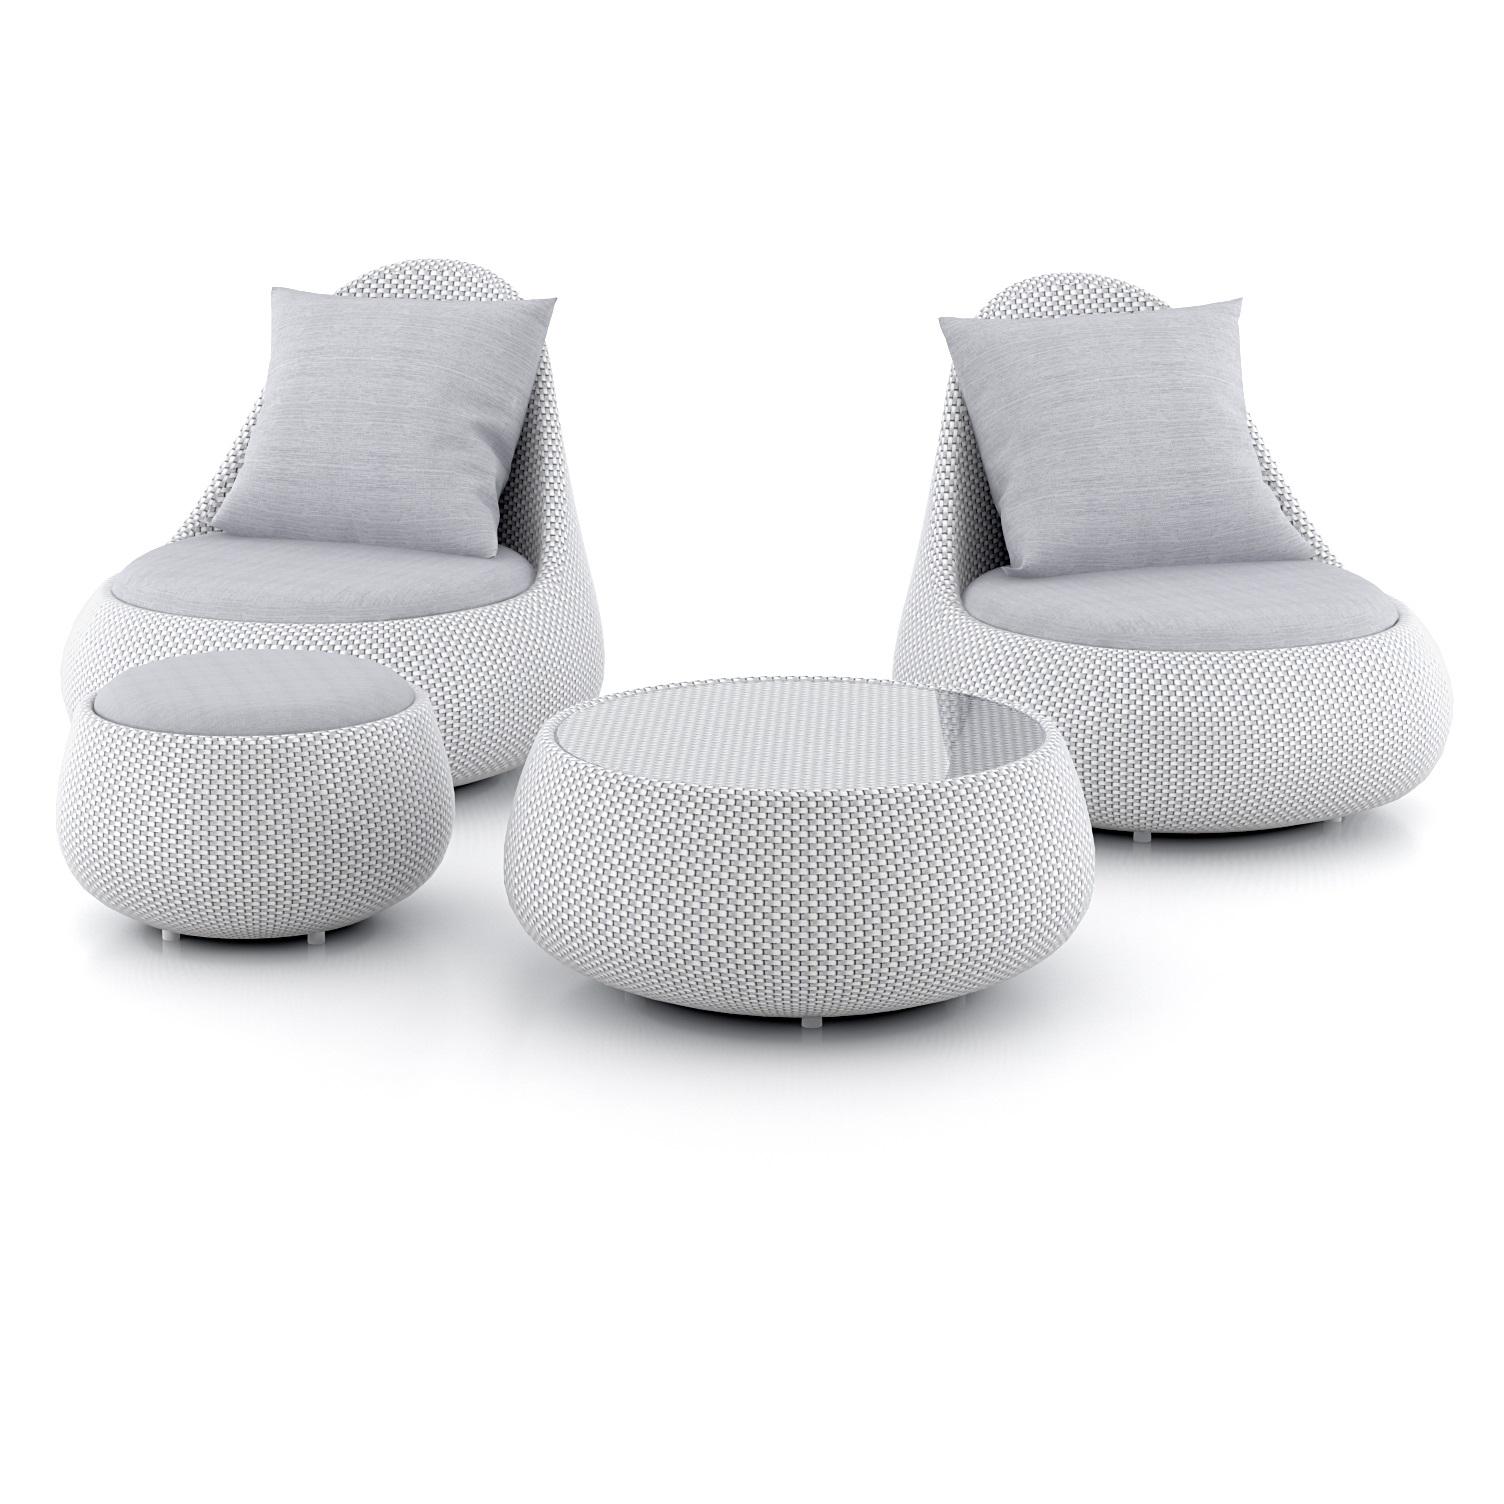 This lounge chair creates a floating feeling of lightness with its rounded silhouette. The elaborate weave and fibers highlights the beauty of its curves. The cushions are firmly embedded and therefore can not slip providing a feeling of